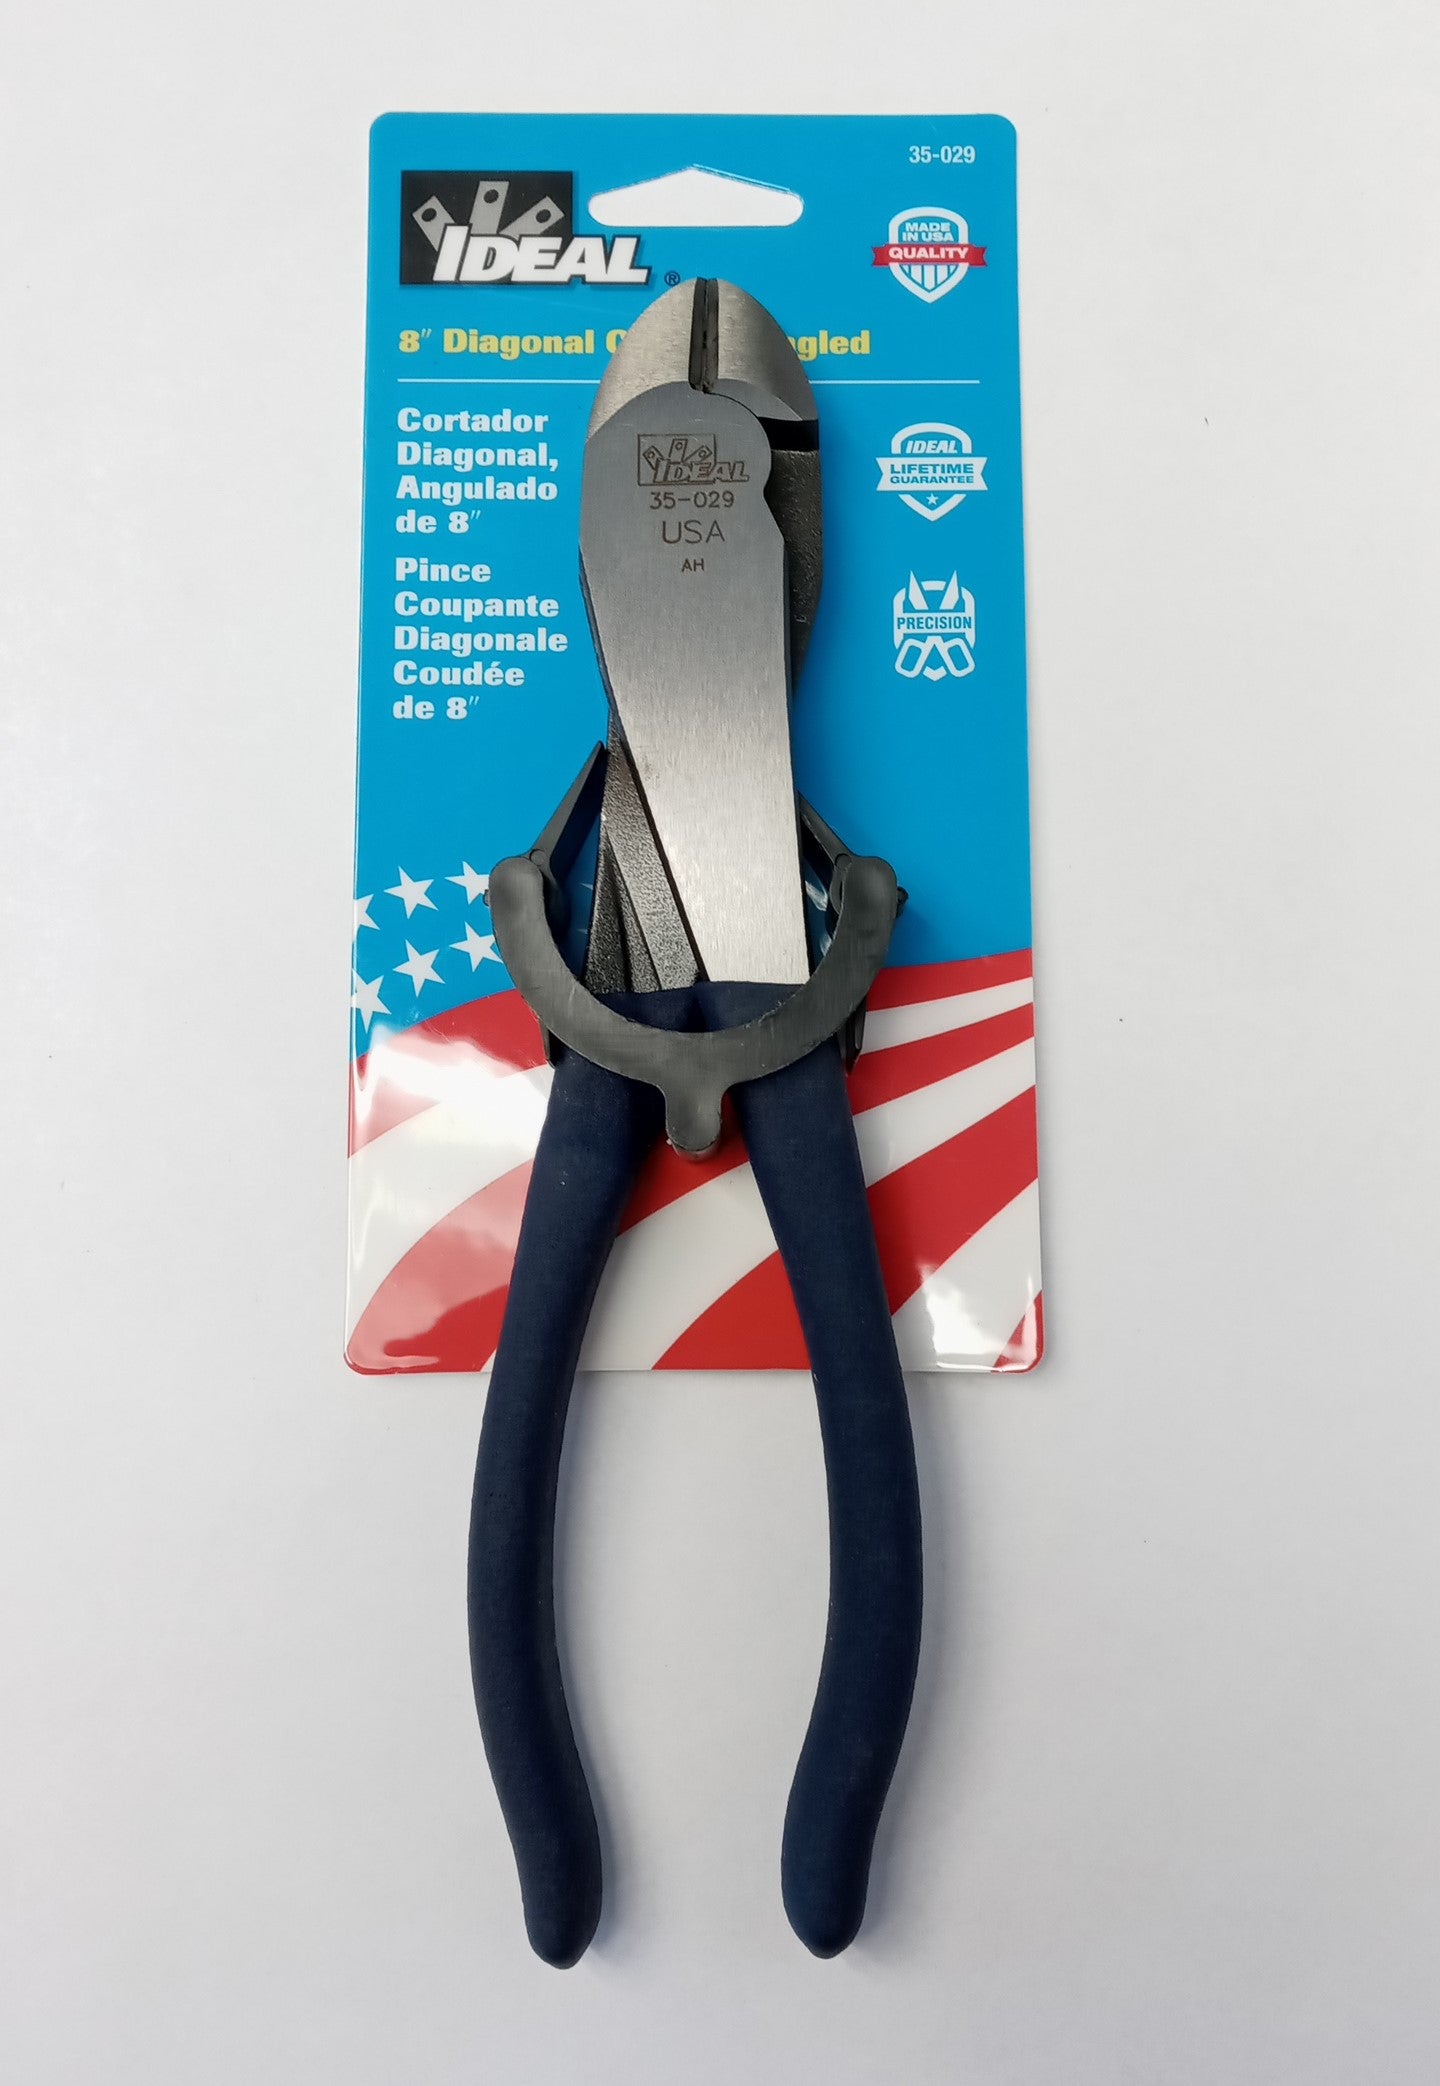 IDEAL 35-029 8 Dipped Grip Diagonal Cutting Plier With Angled Head US